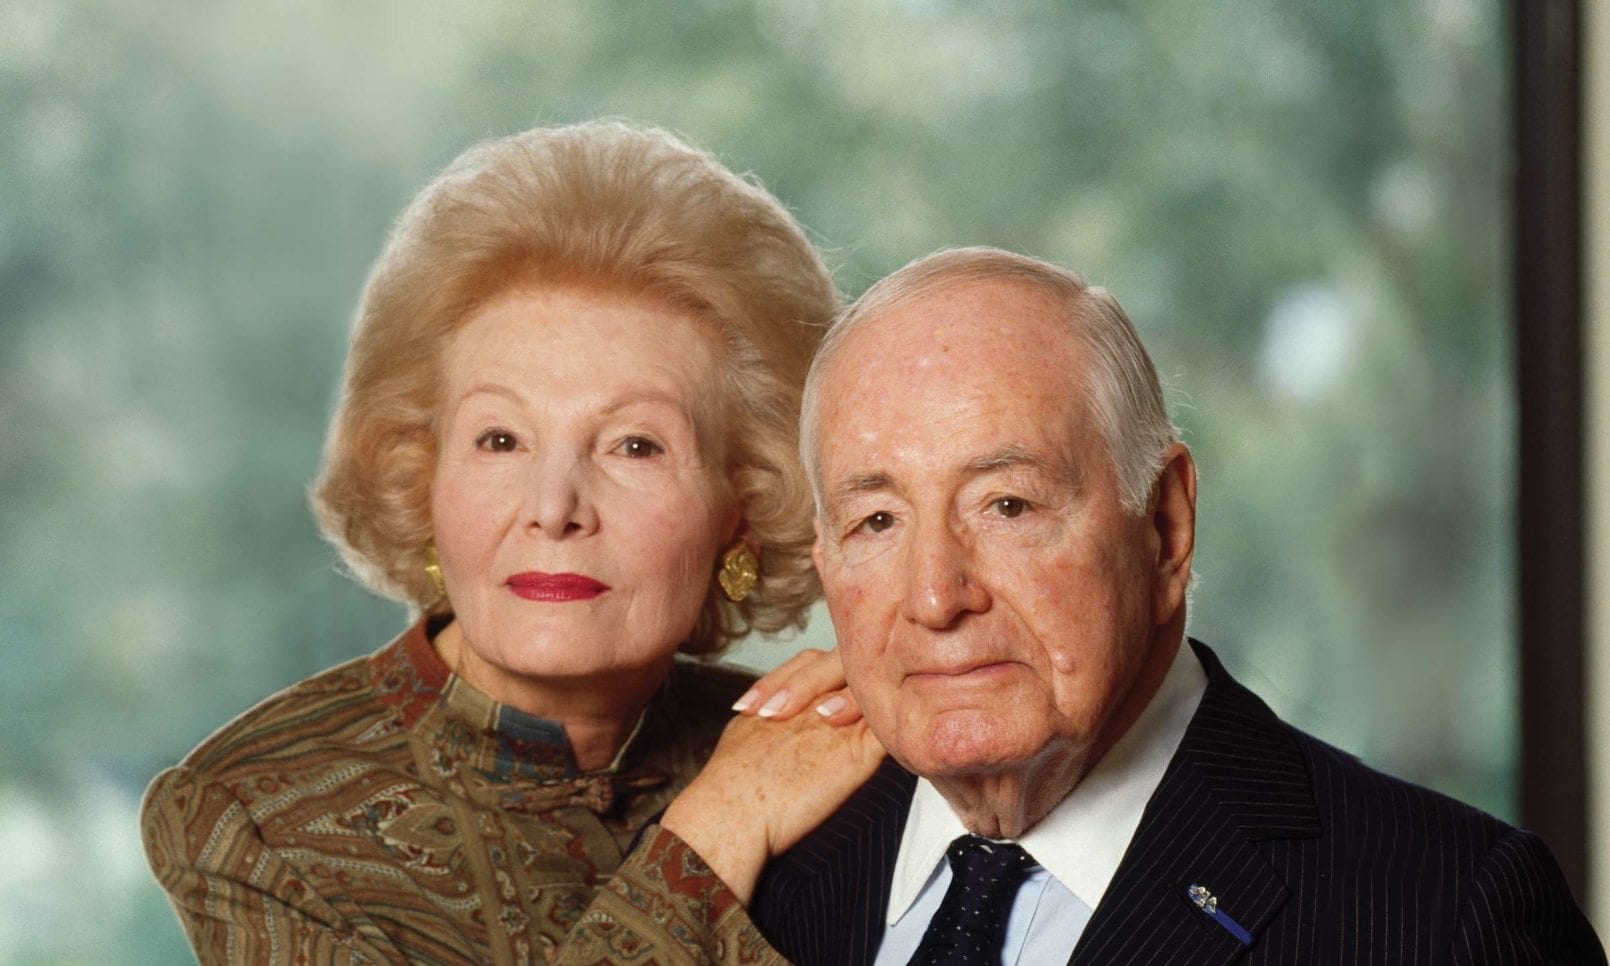 An elderly couple poses for a portrait with the woman standing slightly behind the man, resting her hand on his shoulder. Both are dressed formally, the woman in a paisley patterned dress with gold earrings and the man in a pinstripe suit with a tie and lapel pin. They appear dignified and composed against a blurred natural background.